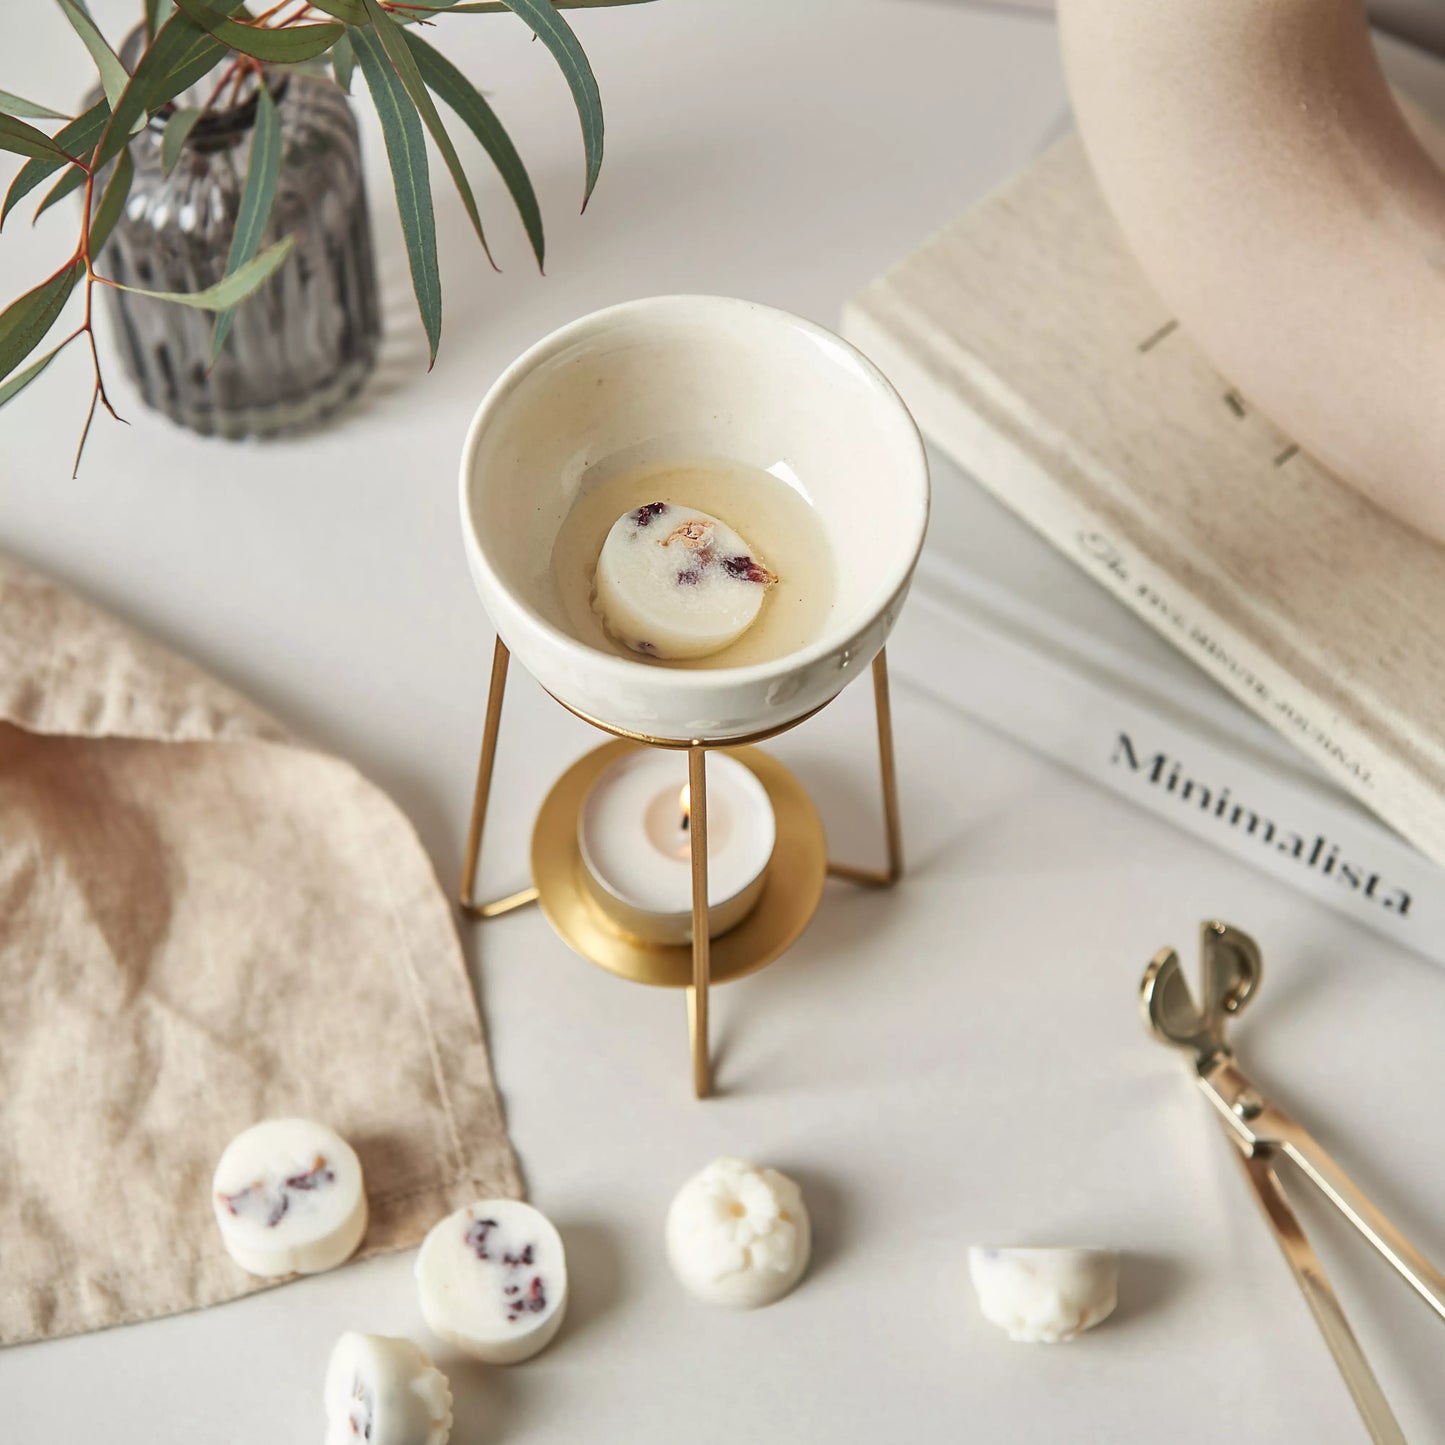 Our Breathe Wax Melts slowly melt in our bronze wax warmer, heated by a tea light beneath it.